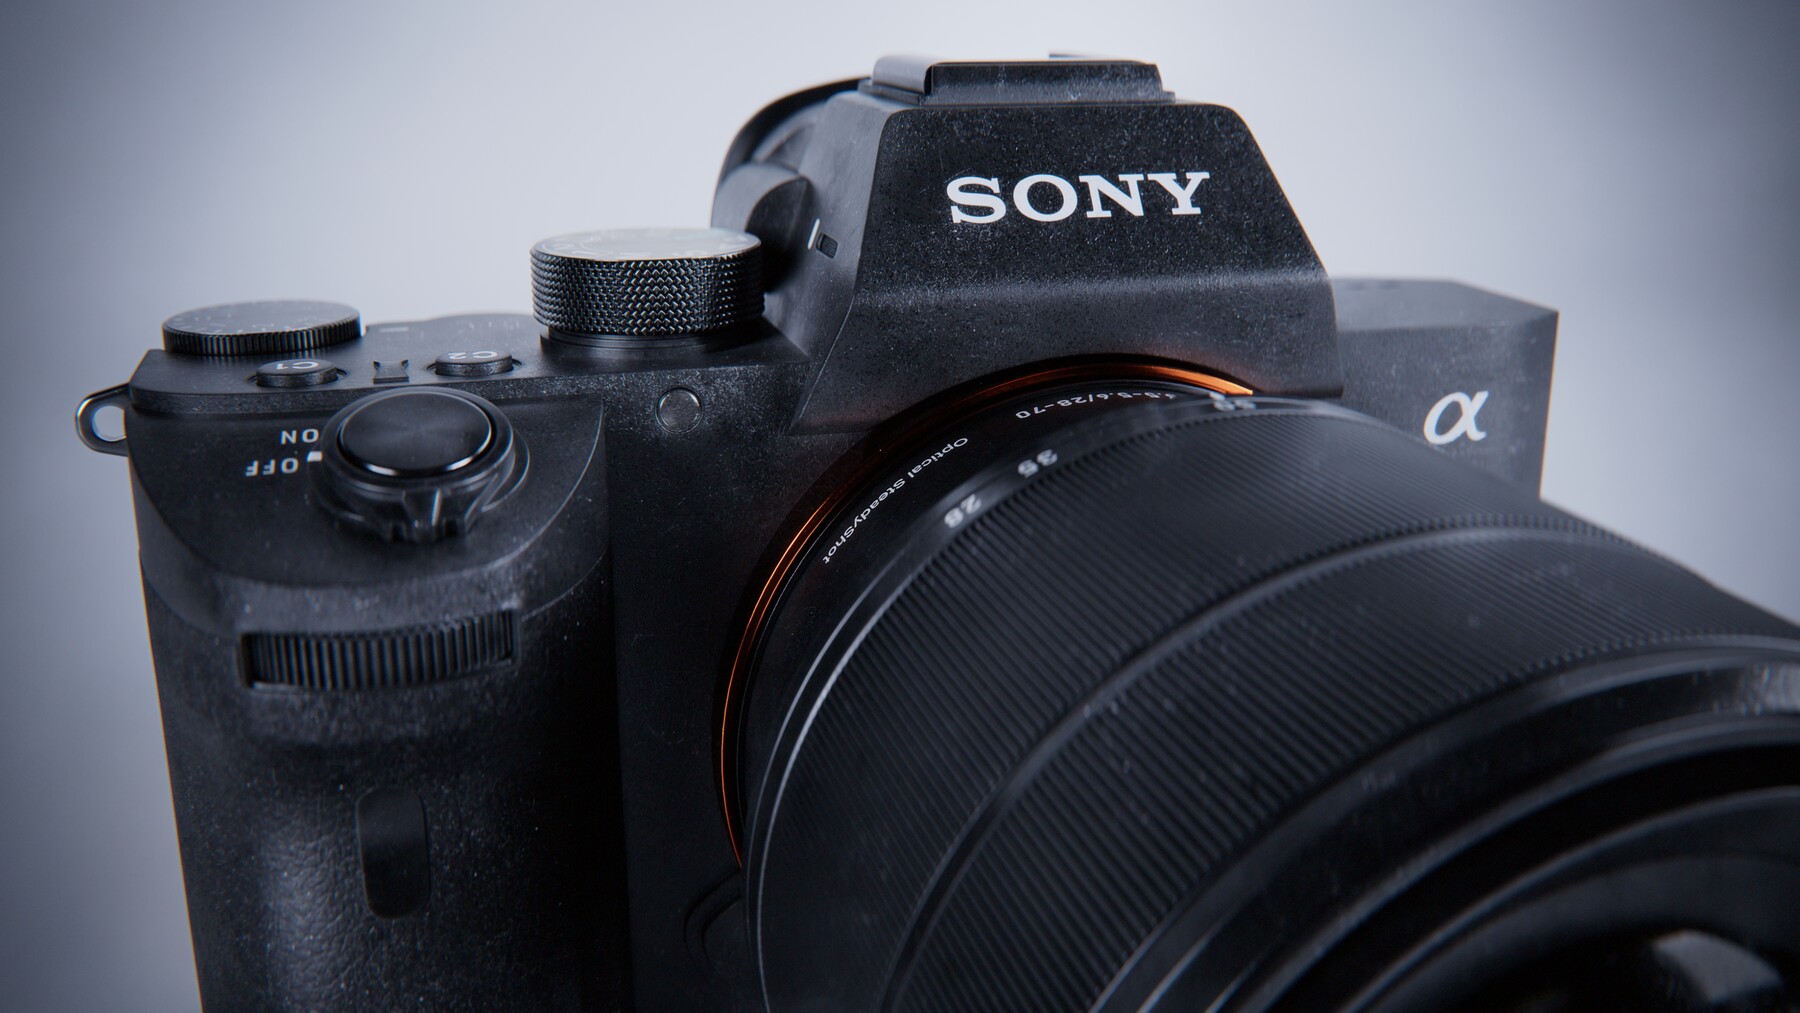 242 Sony A7ii Images, Stock Photos, 3D objects, & Vectors